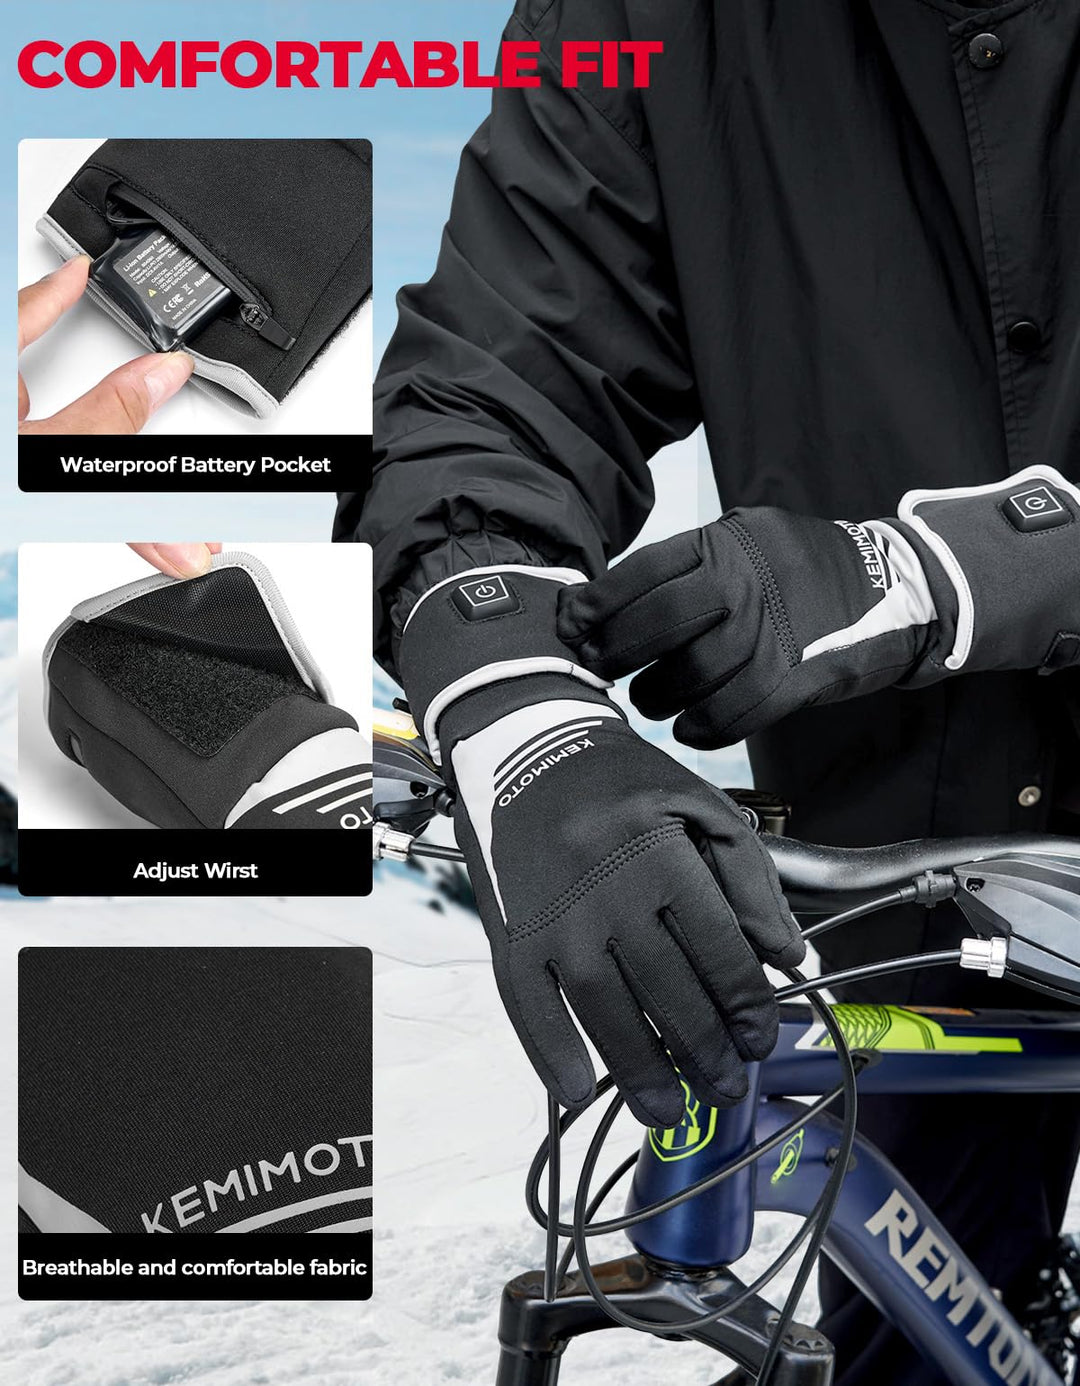 7.4V Heated Motorcycle Gloves Liners - Kemimoto